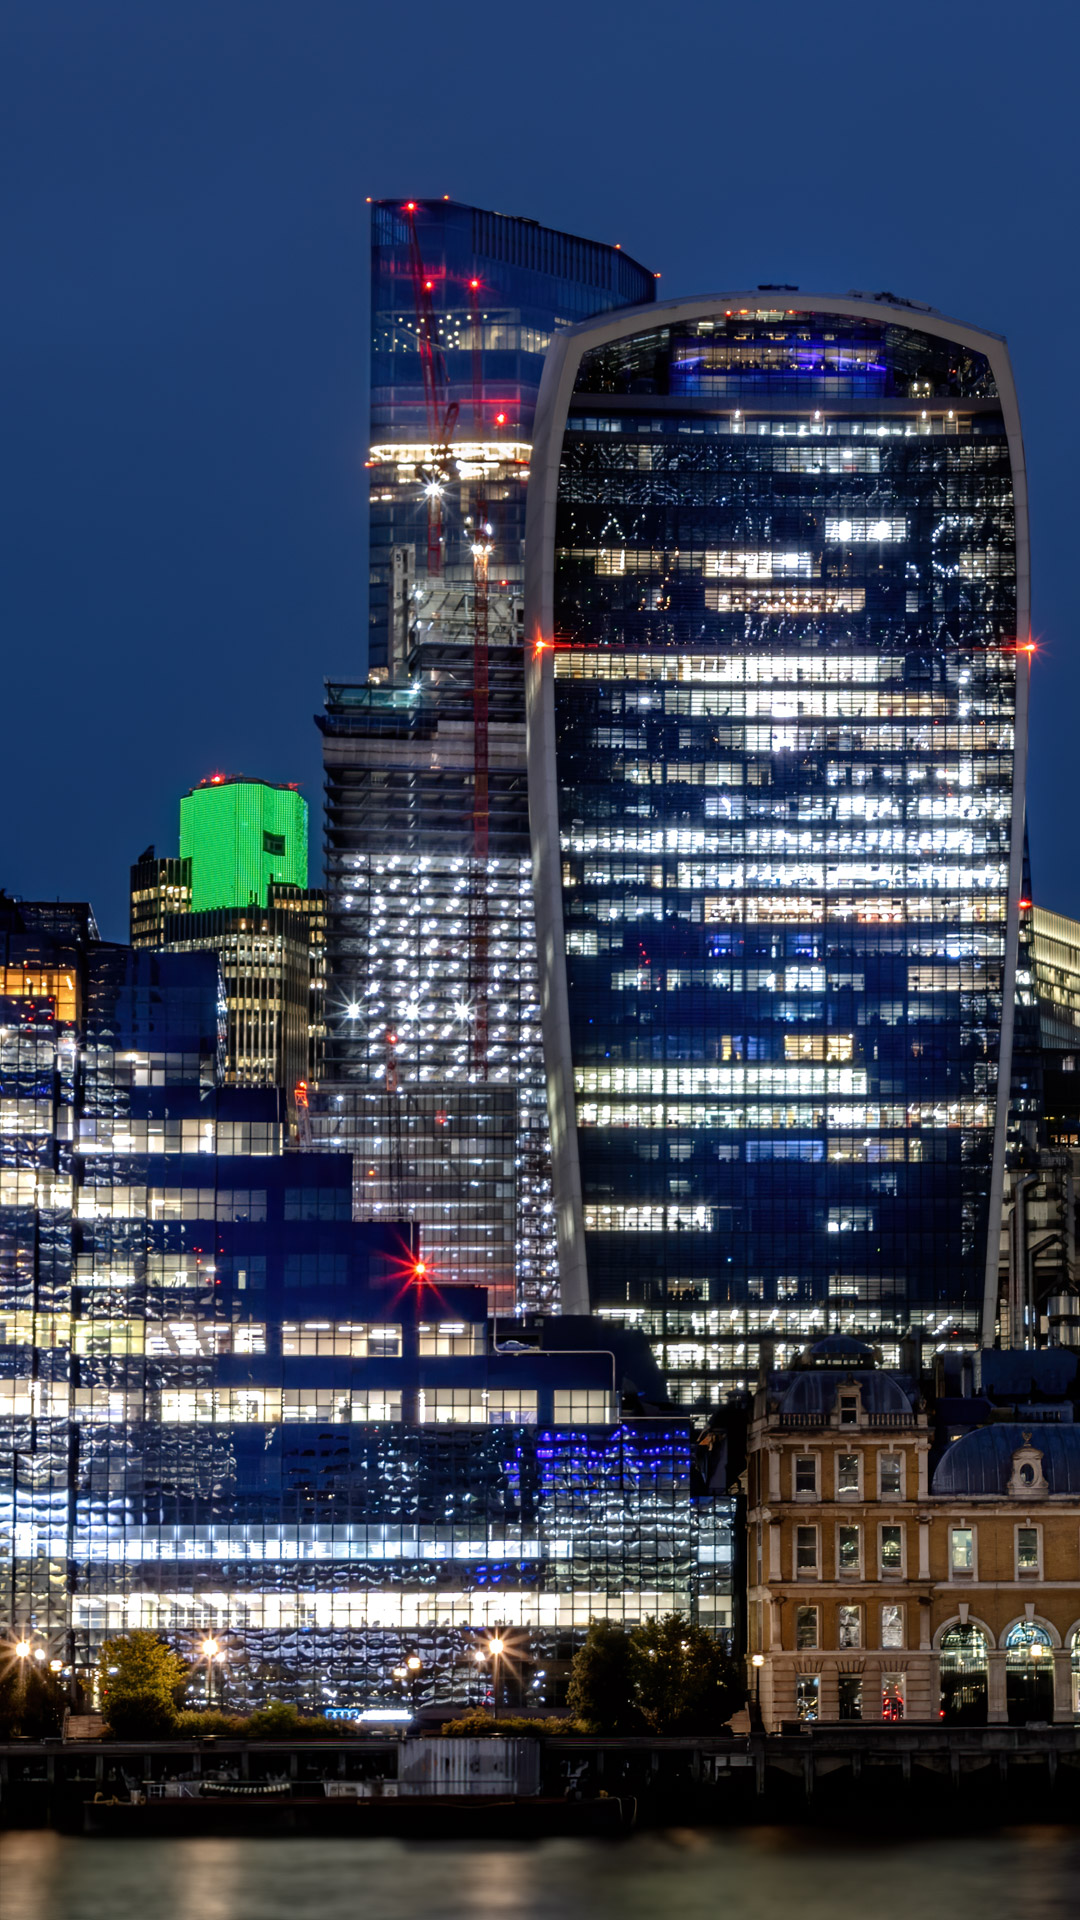 This wallpaper showcases the mesmerizing lights of the city of London at night, perfect for any iPhone user.